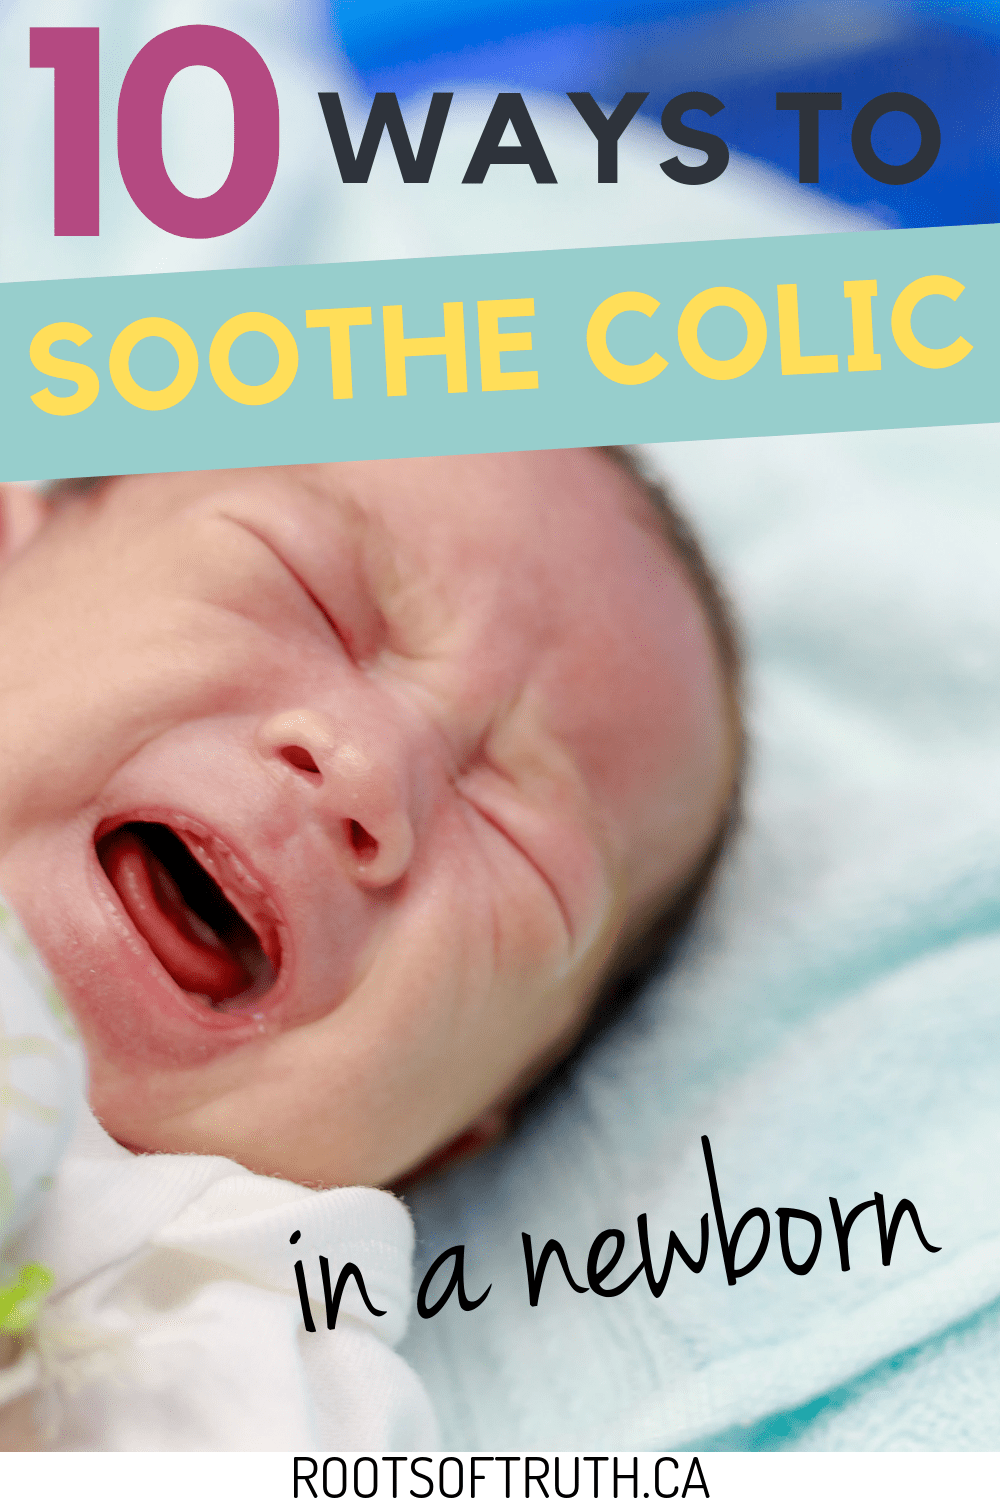 What To Do If Your Baby Has Colic